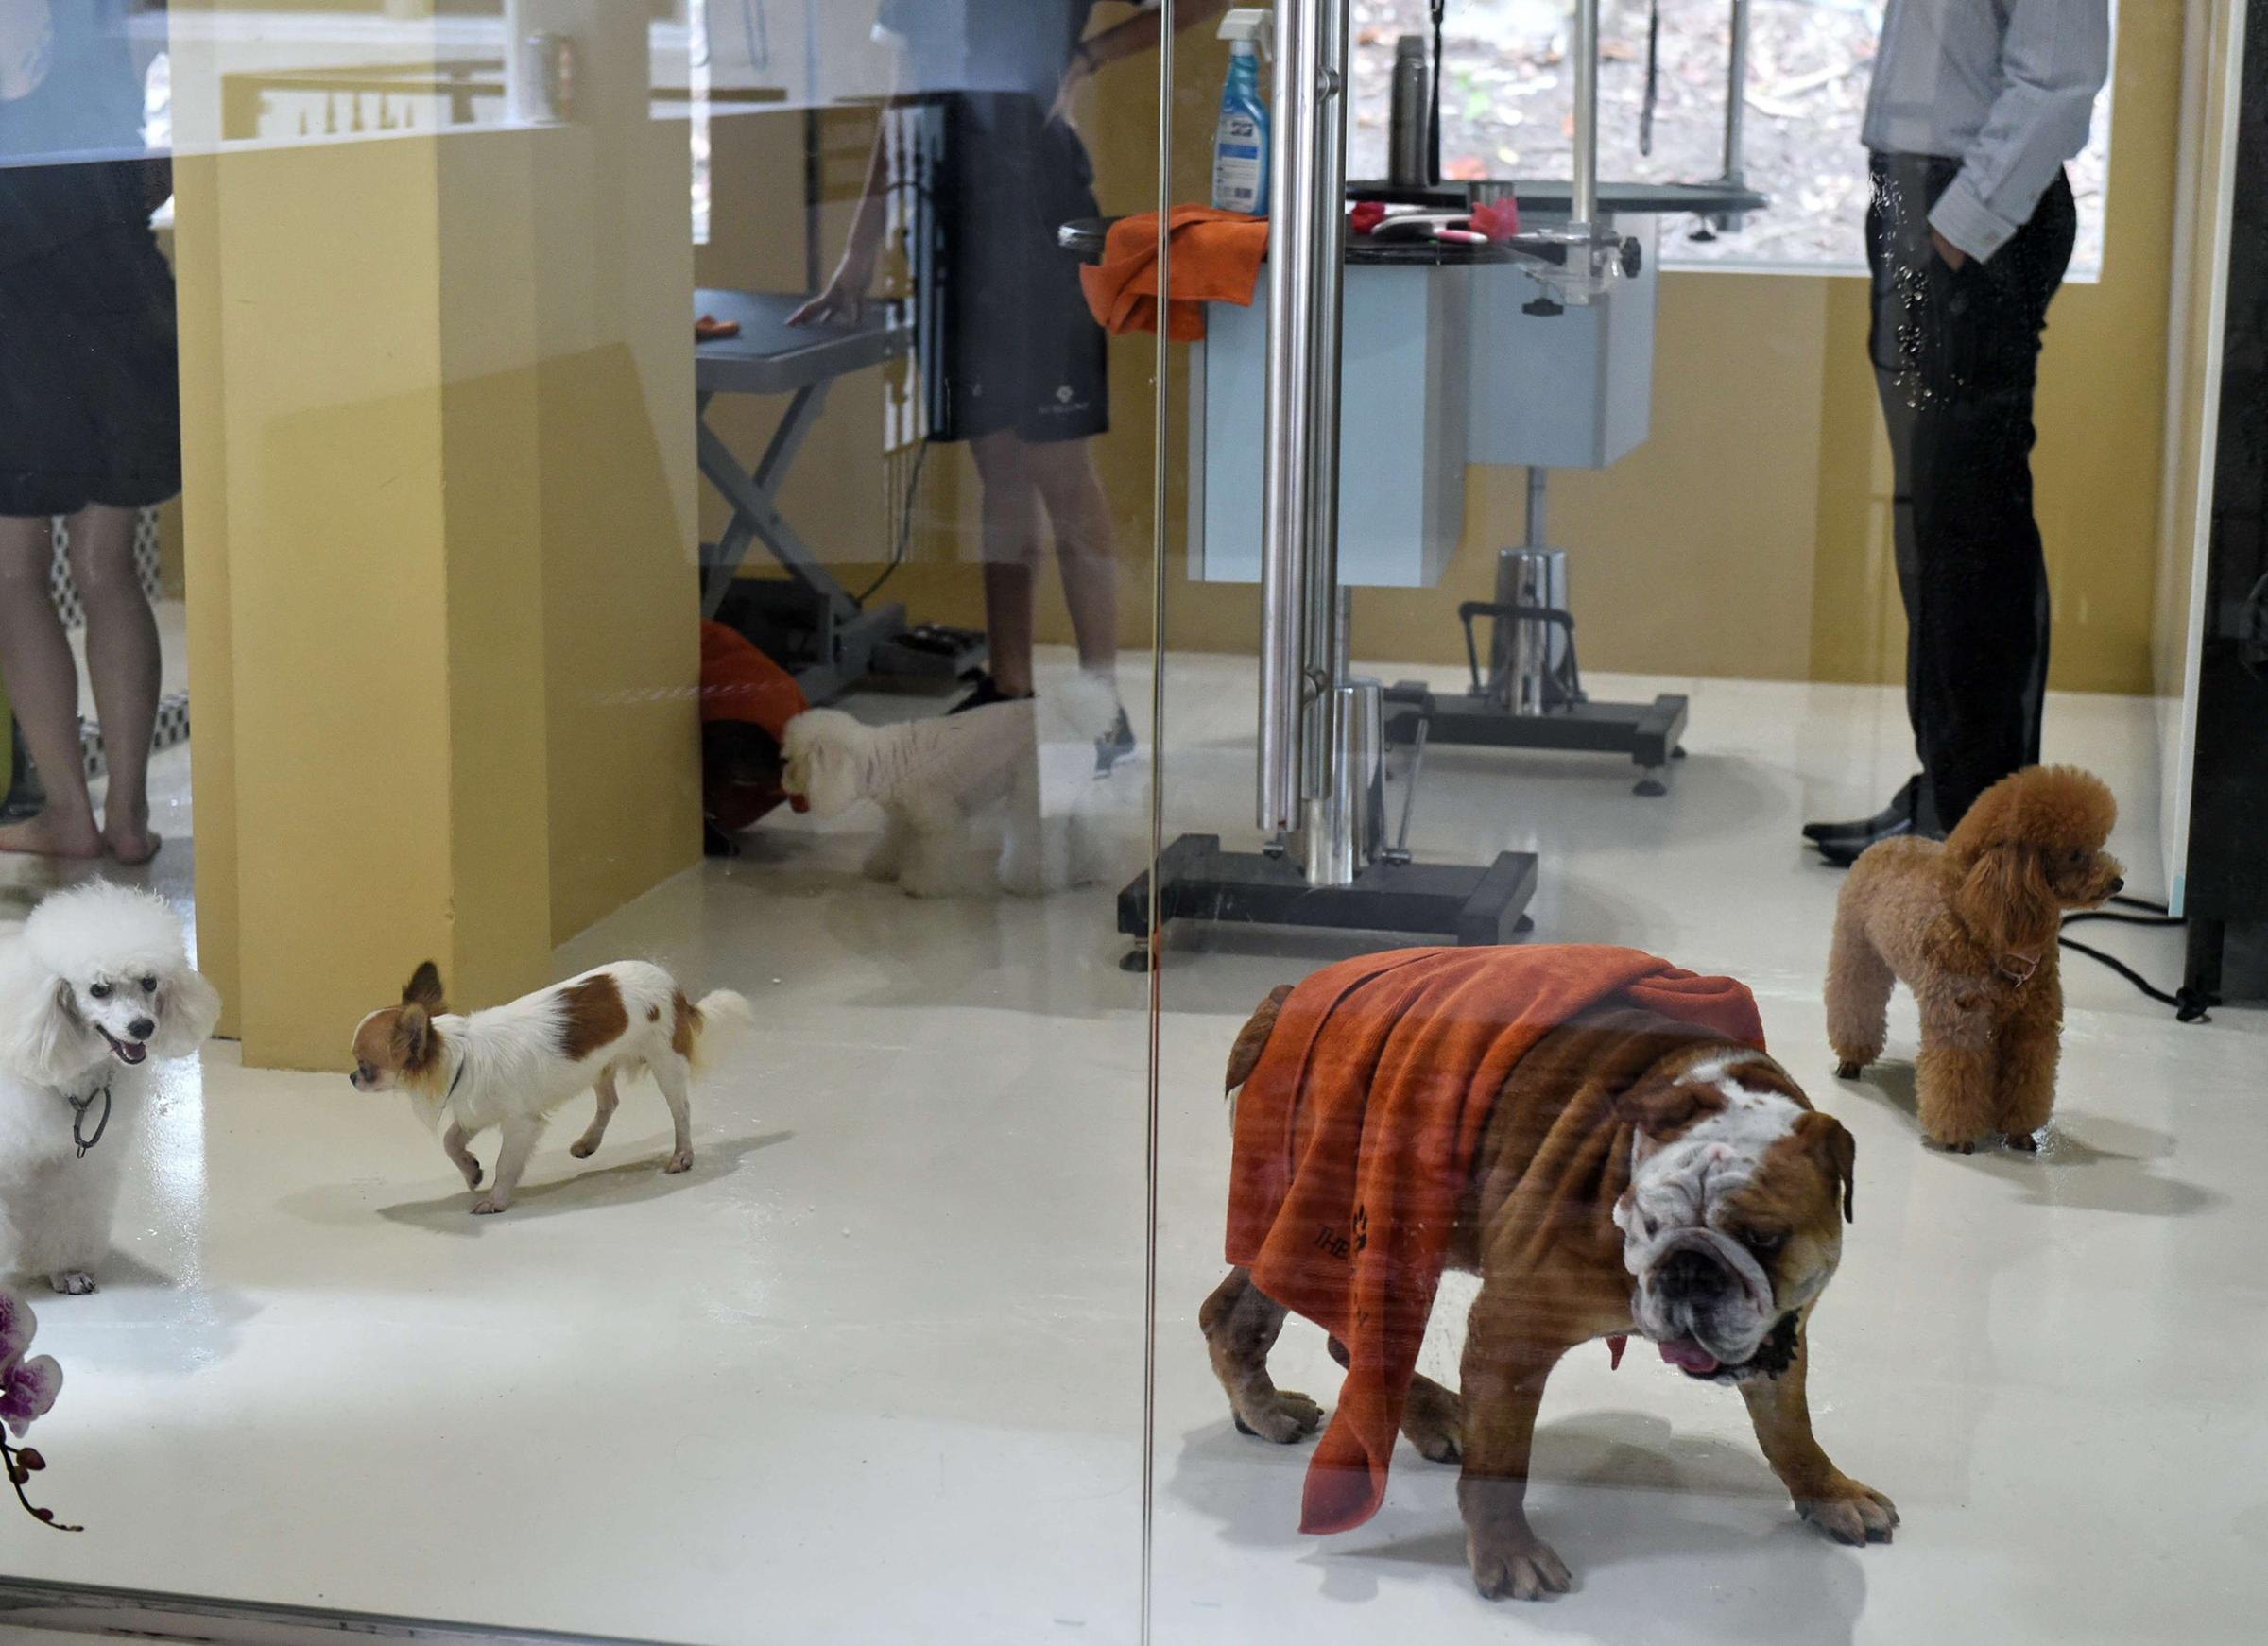 Dogs trot around in a spa and grooming room at the Wagington luxury pet hotel in Singapore on Nov. 4, 2014.